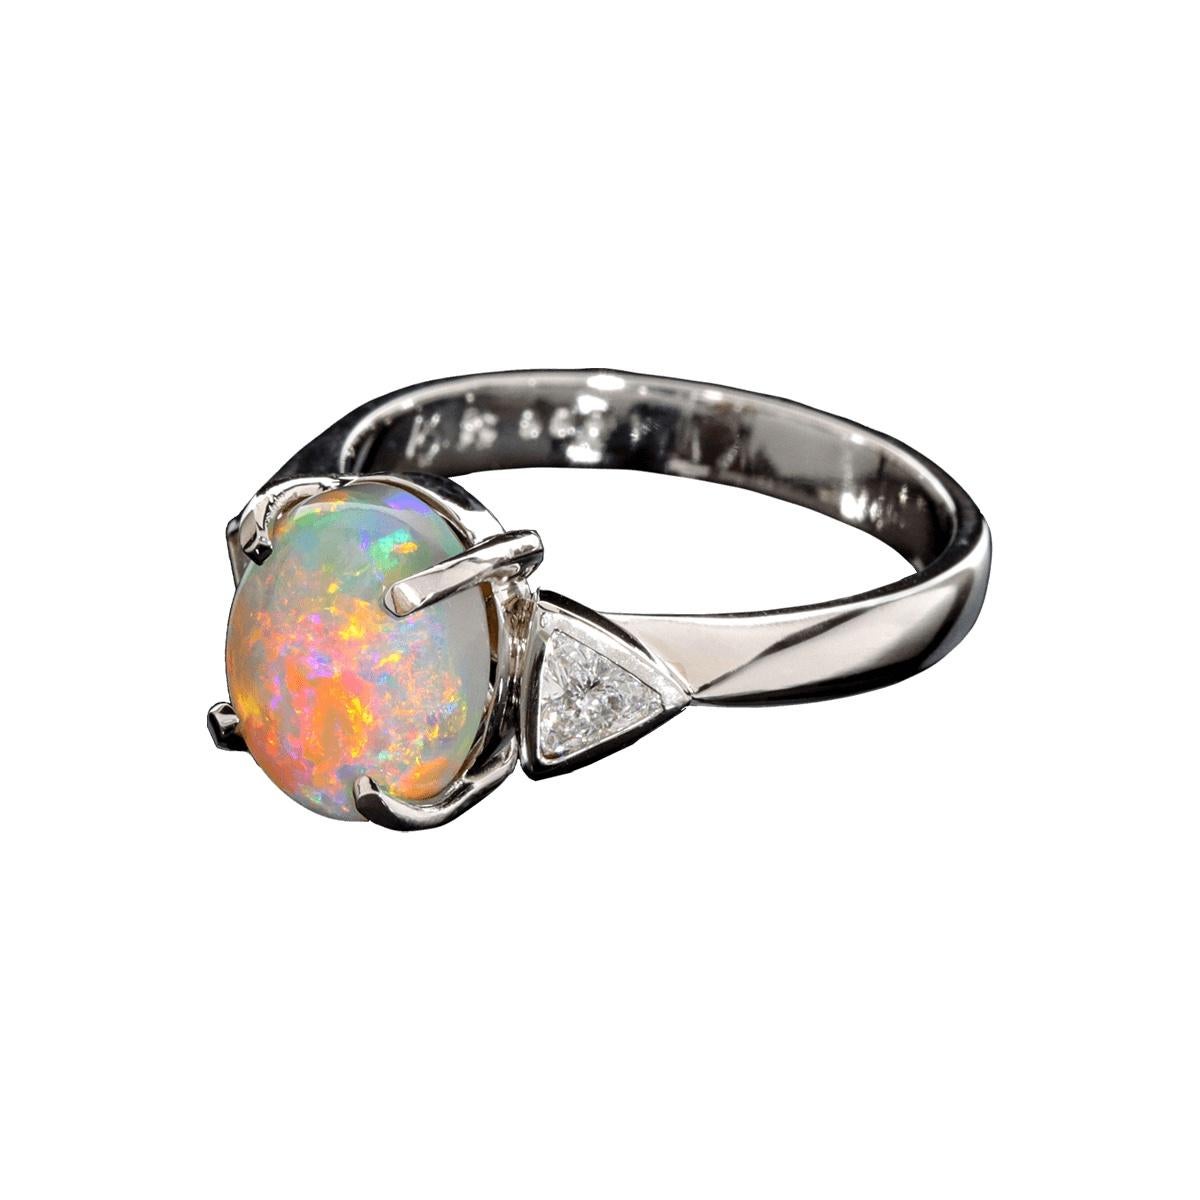 Sophisticated yet minimalistic in its design, this amazing solid platinum ring sports a stunning solid Australian dark Crystal Opal and two large brilliant white diamonds. Red is the rarest and most sought after colour in opal and this gem has